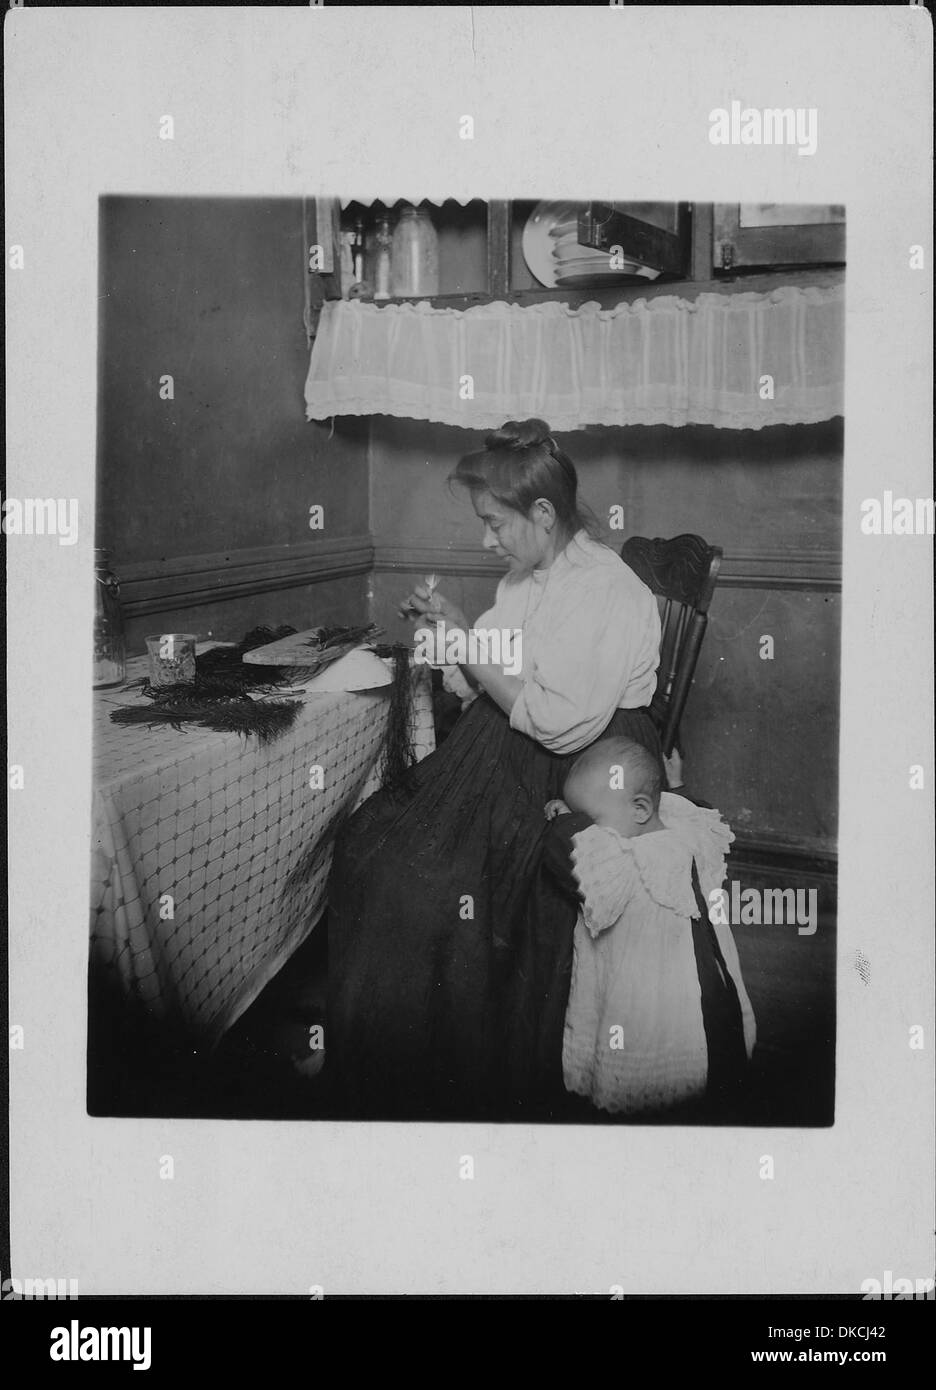 Mrs. Capello makes 50 (cents) to $1 a week making willow plumes. Husband works irregularly as a tailor. New York City. 523501 Stock Photo